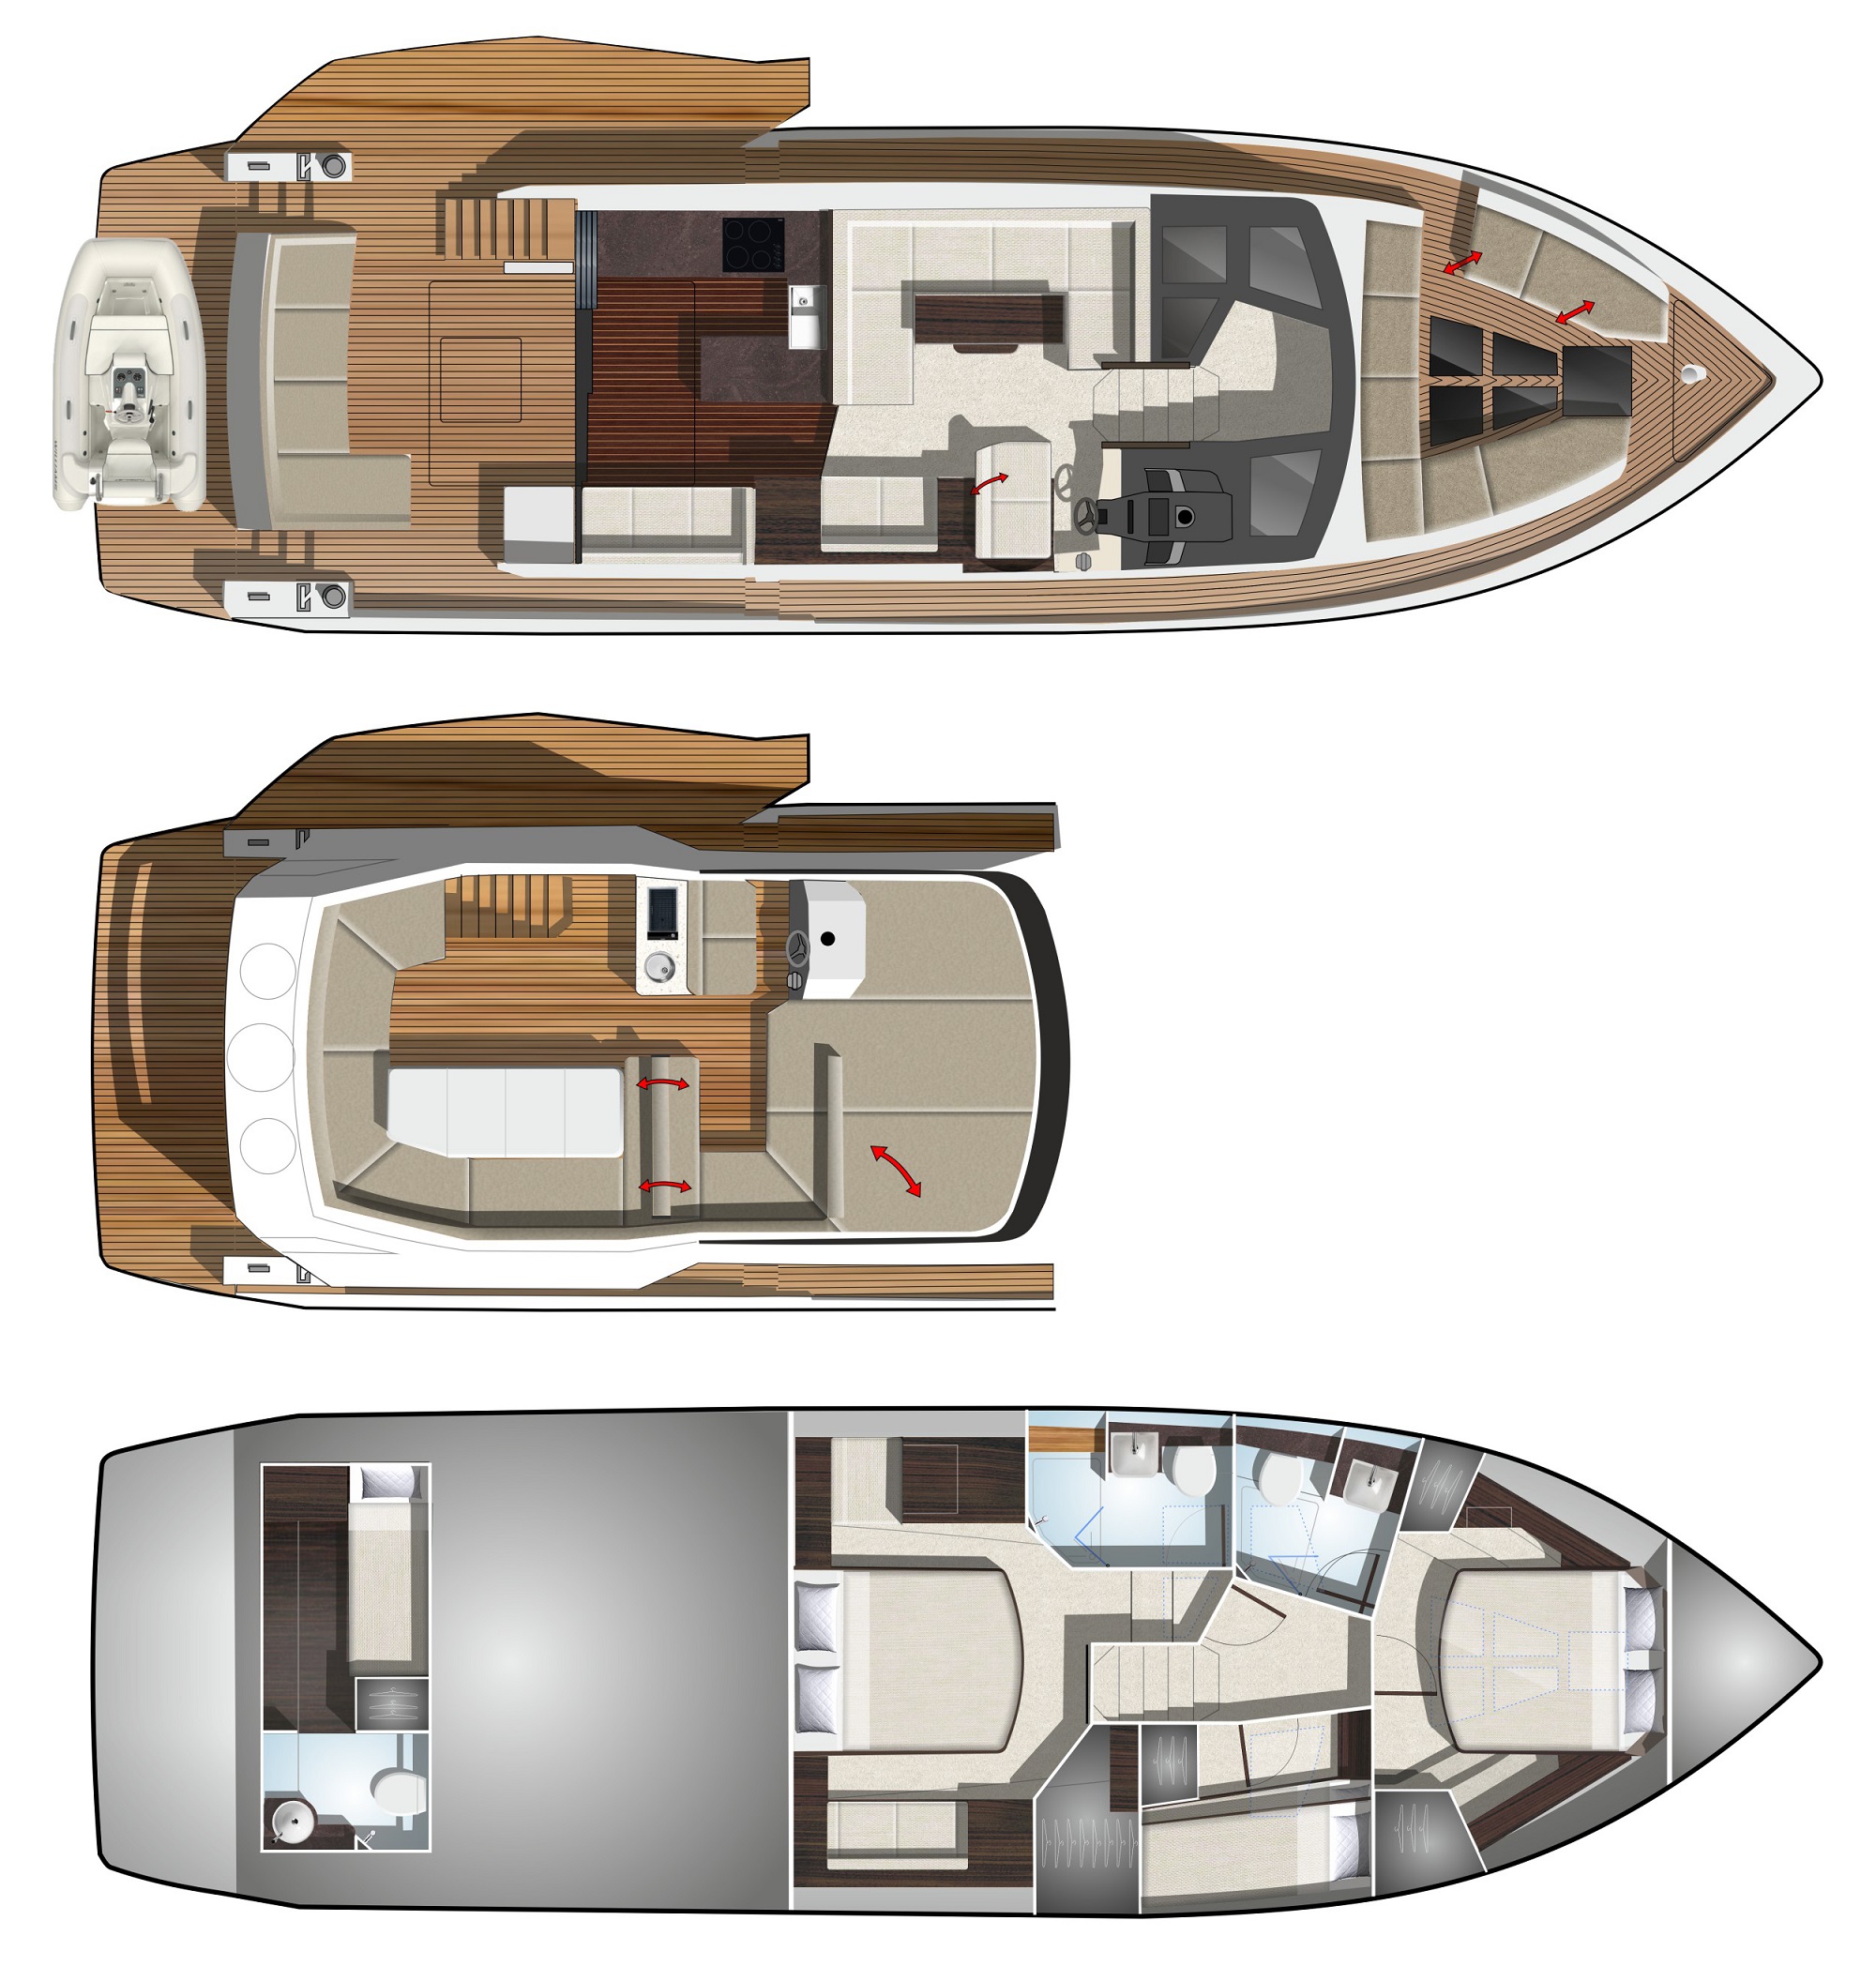 Galeon 500 Fly Details - Used Boats For Sale in Dubai, UAE | Boat ...